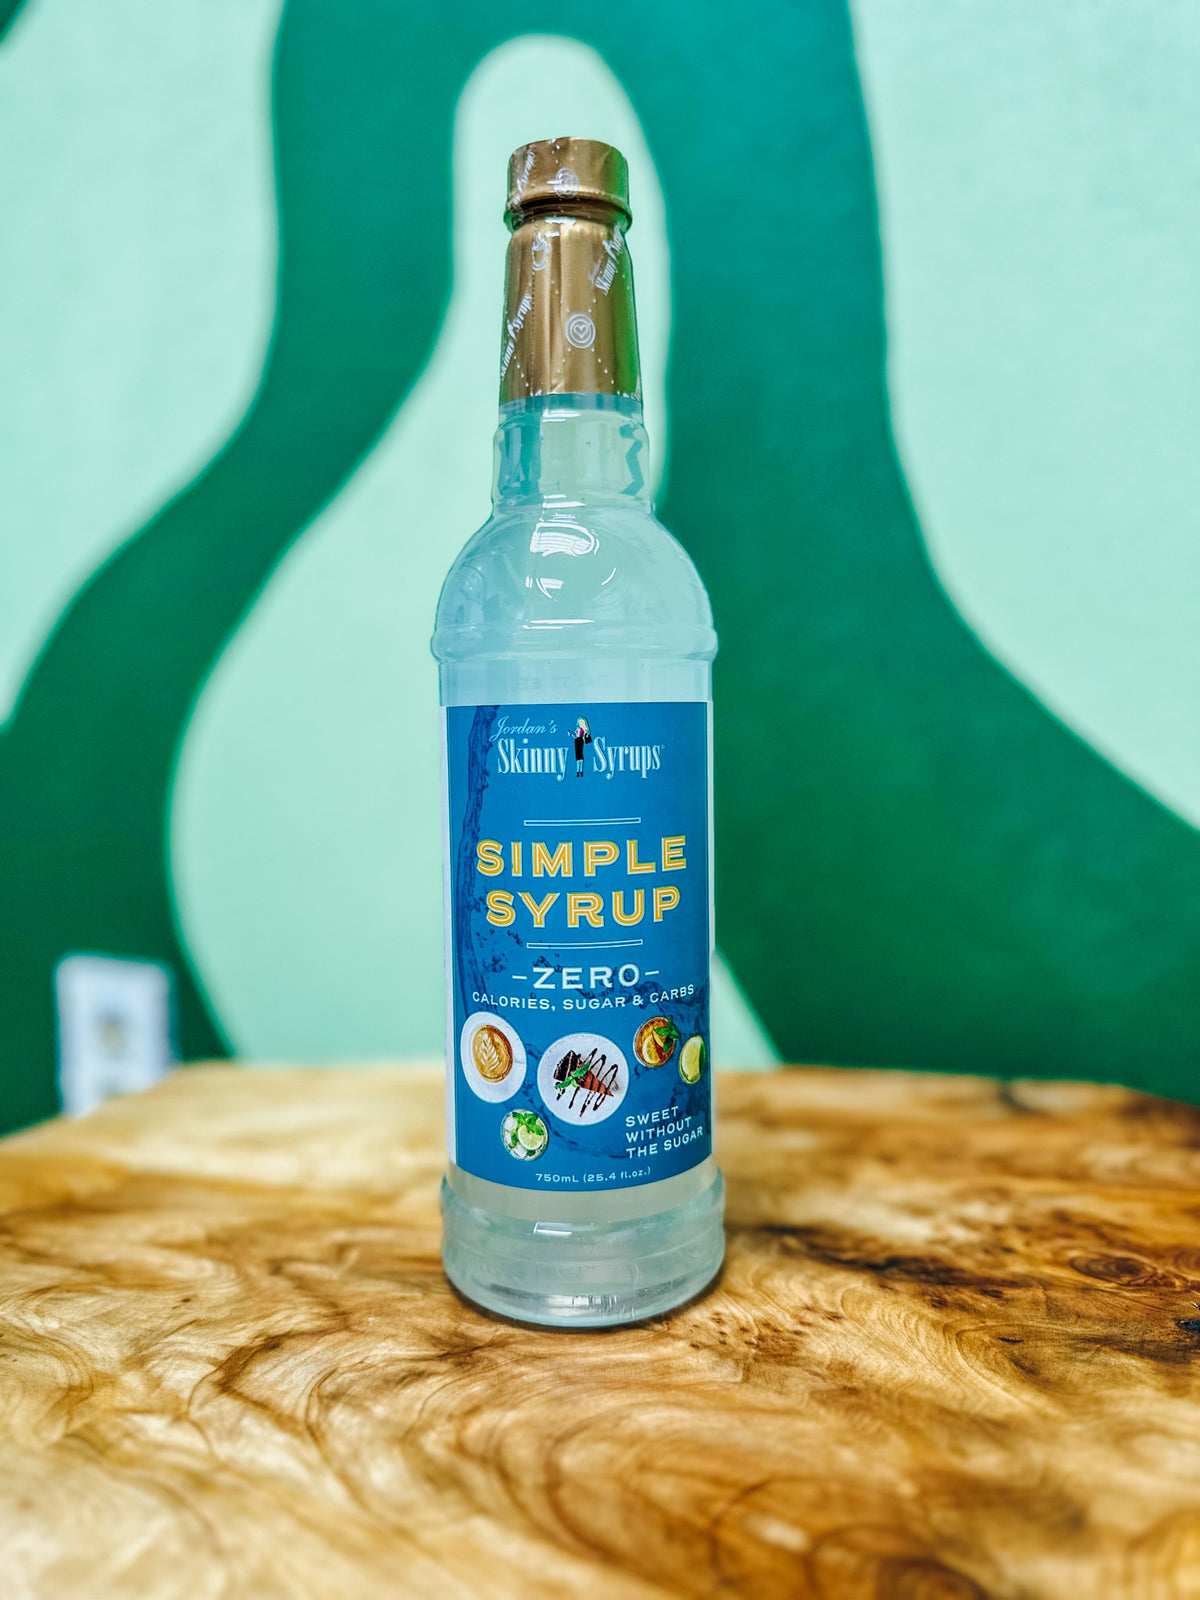 Simple Syrup Skinny Syrup's